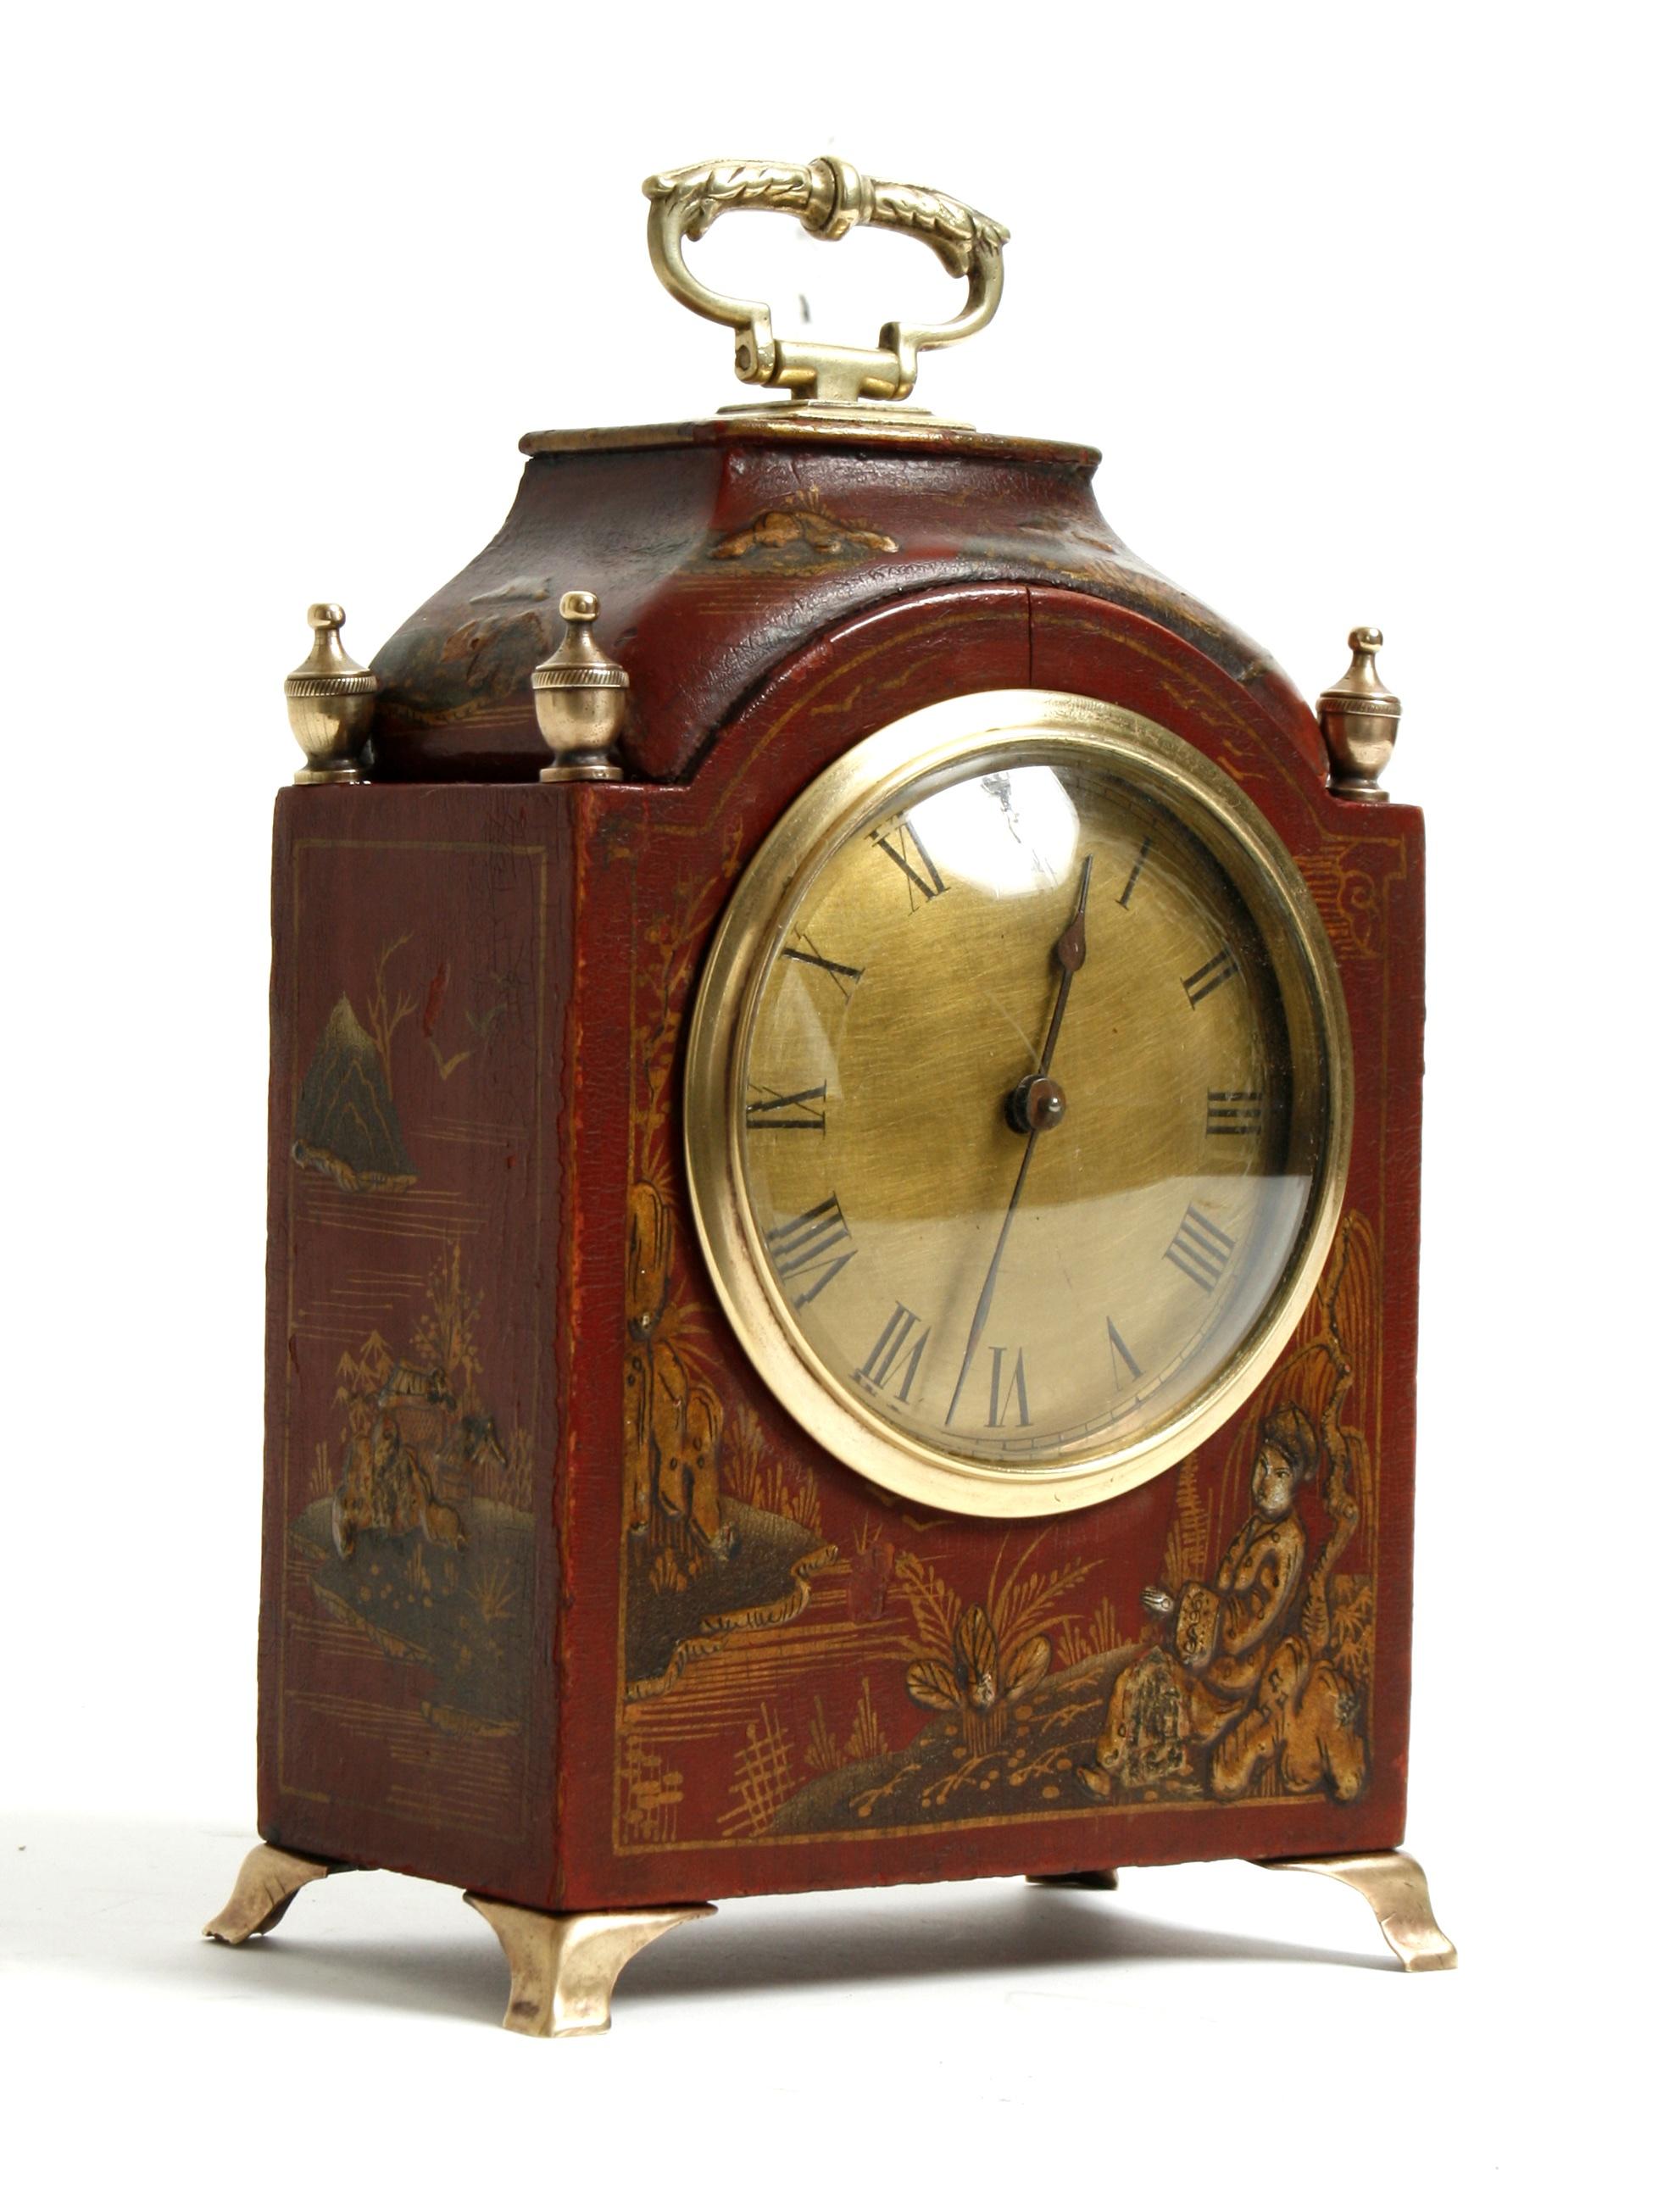 This beautiful clock containing later French works is decorated with scenes of Asian country life. It has a decorative brass handle, finials, face and legs. The wooden case is painted red with raised details of gold and brown. A charming timepiece.